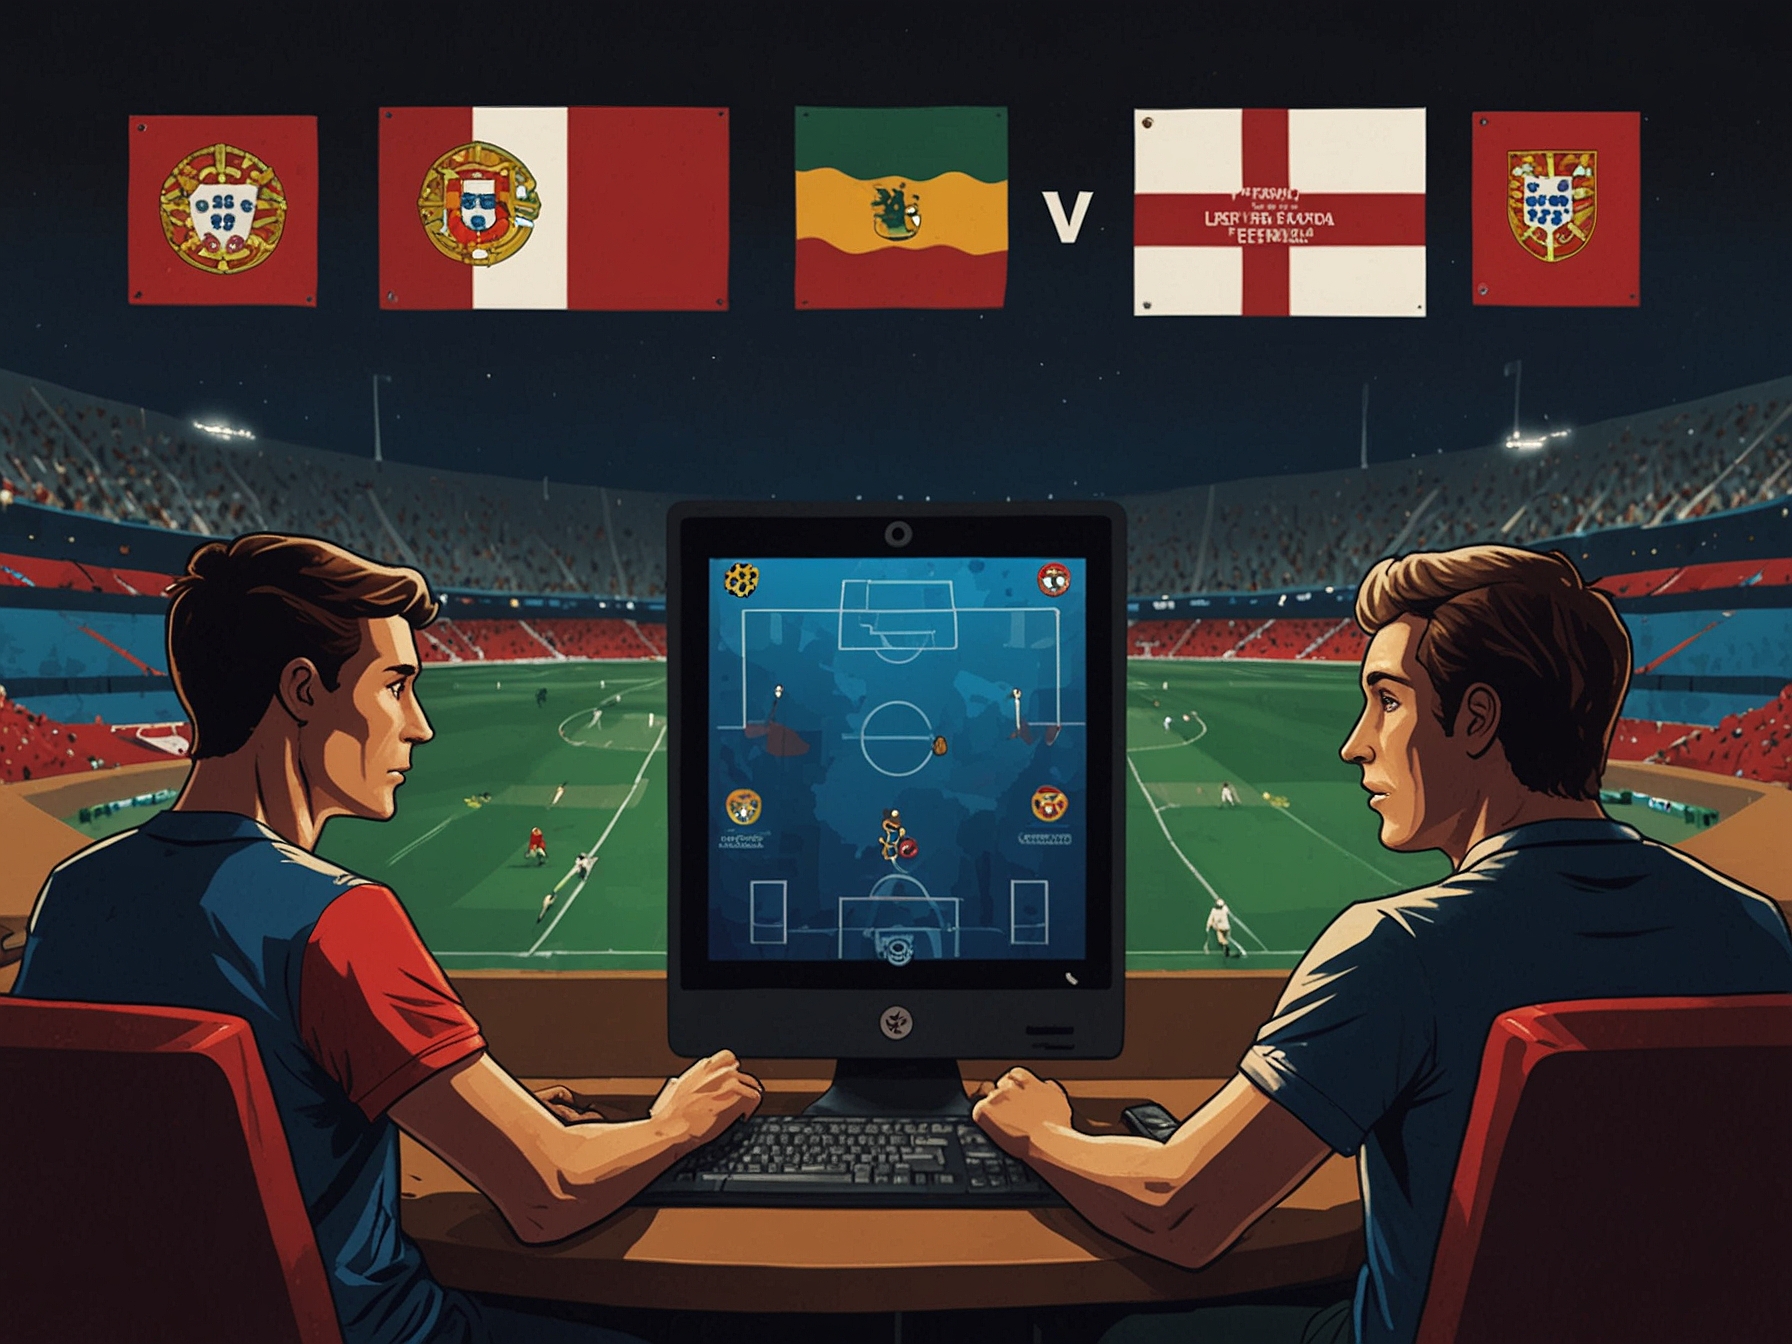 An illustration of how to use a VPN to watch the Georgia vs Portugal match for free. The image includes icons representing VPN services and global streaming options.